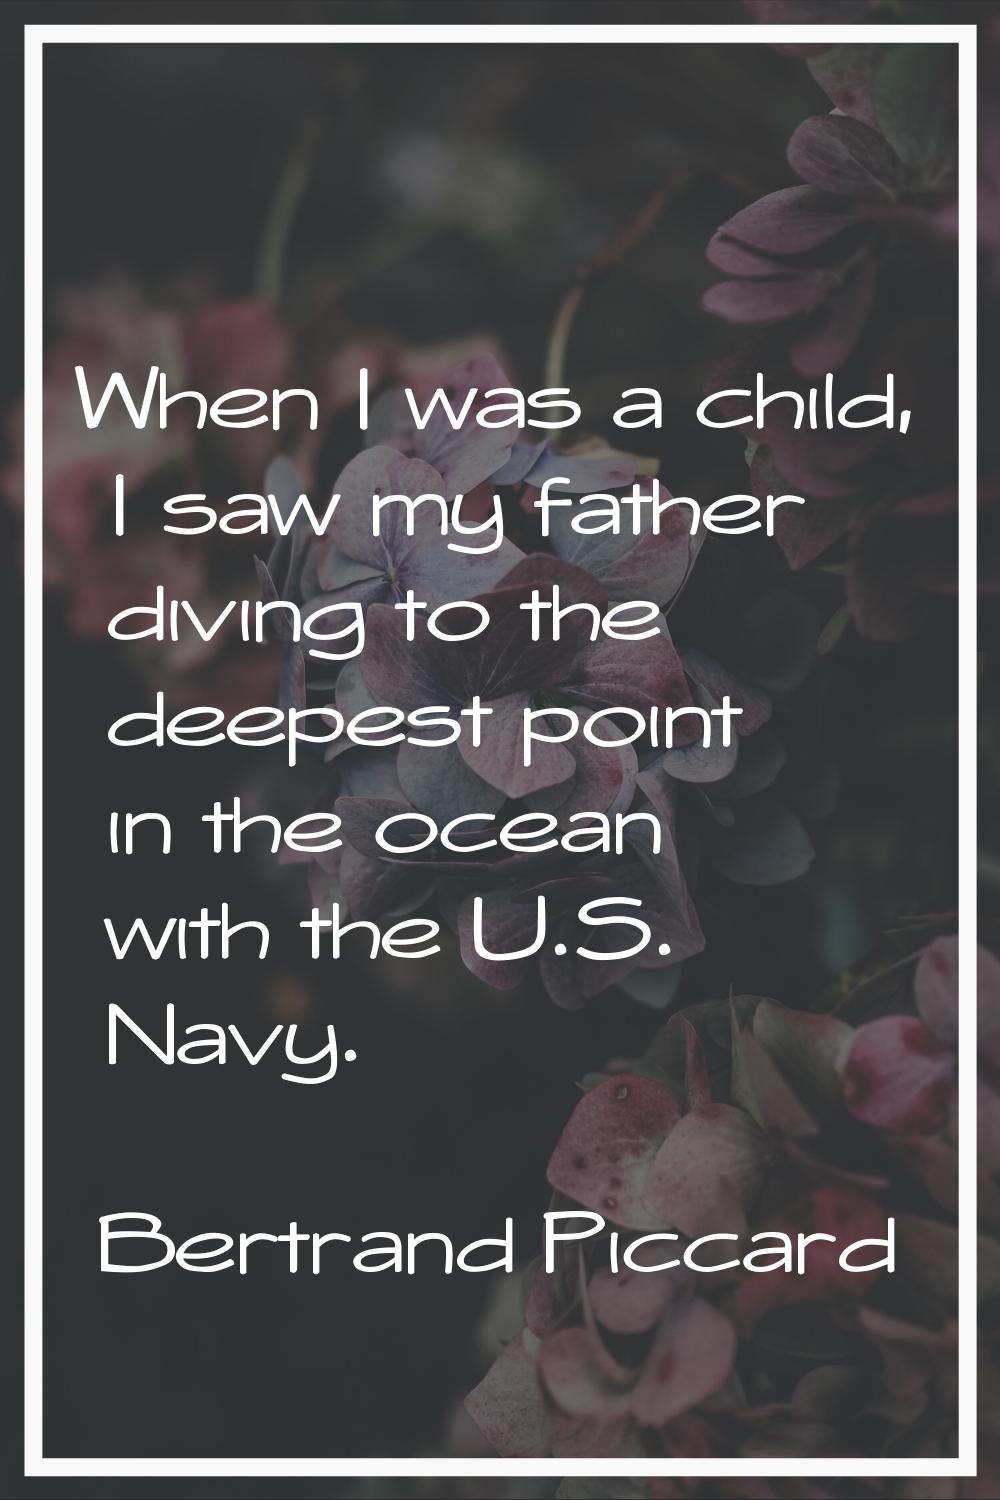 When I was a child, I saw my father diving to the deepest point in the ocean with the U.S. Navy.